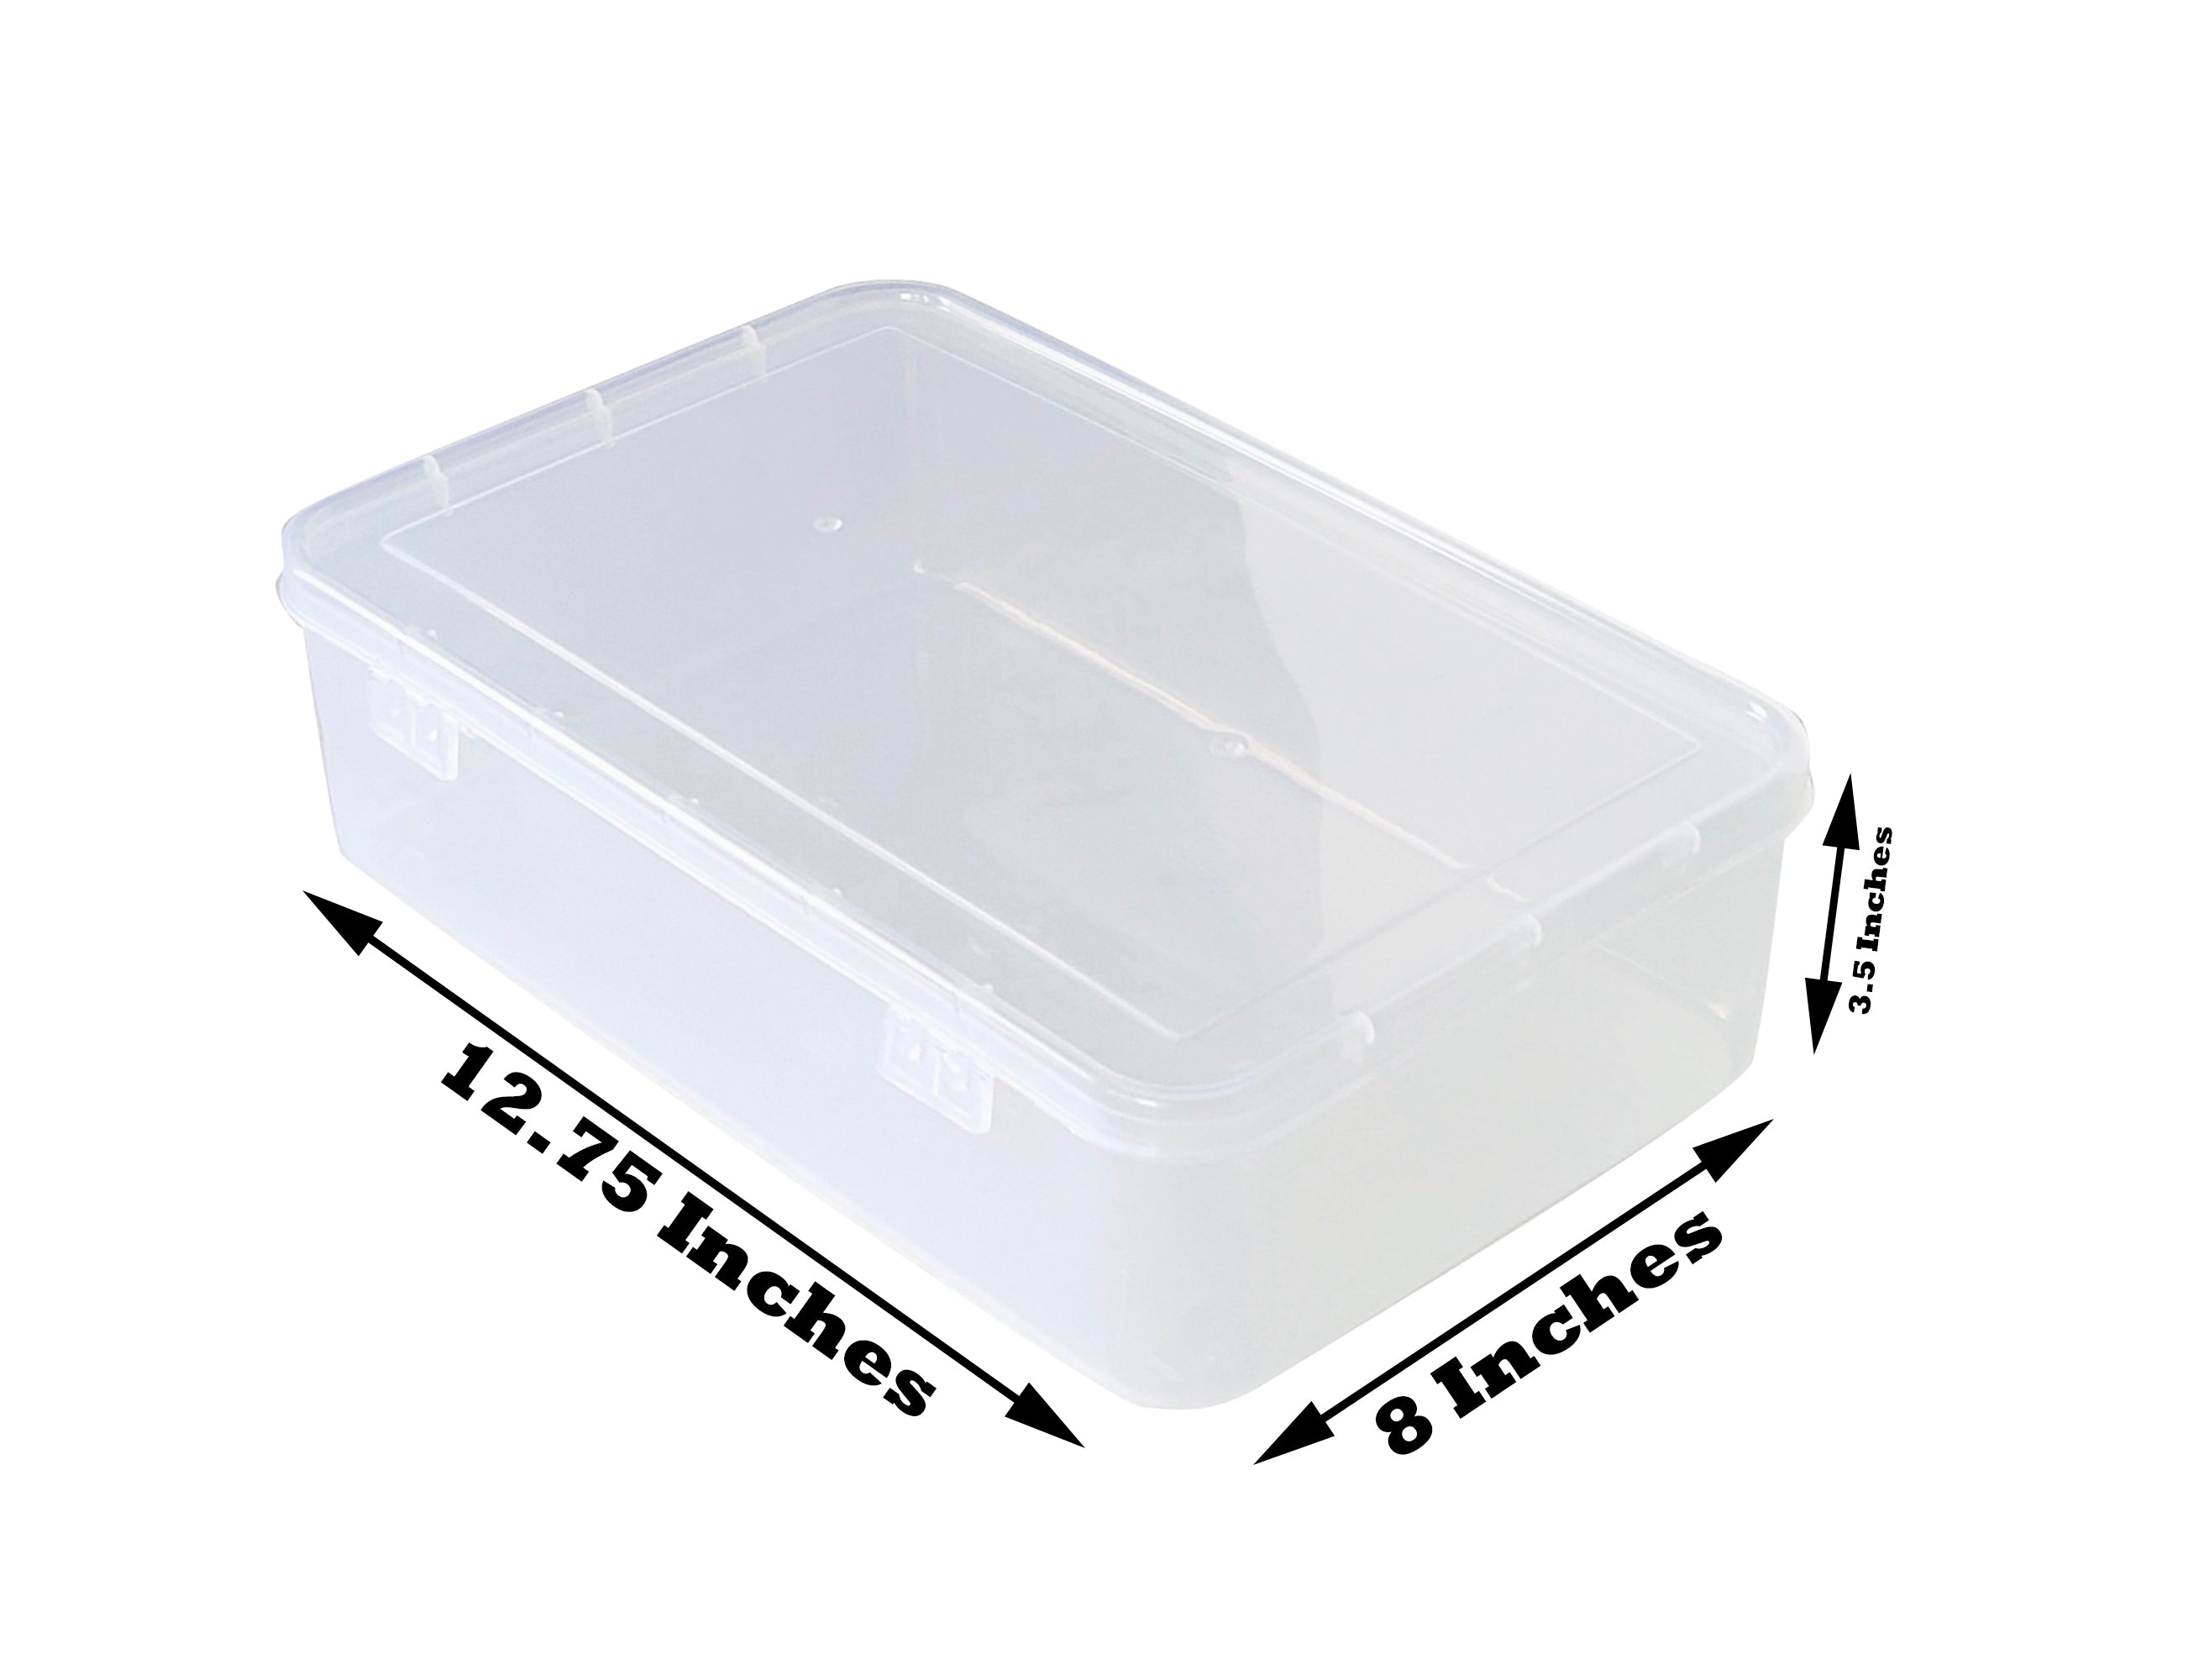 Clear Plastic Extra Large Storage Box Size 12.75x8x3.5 Inches